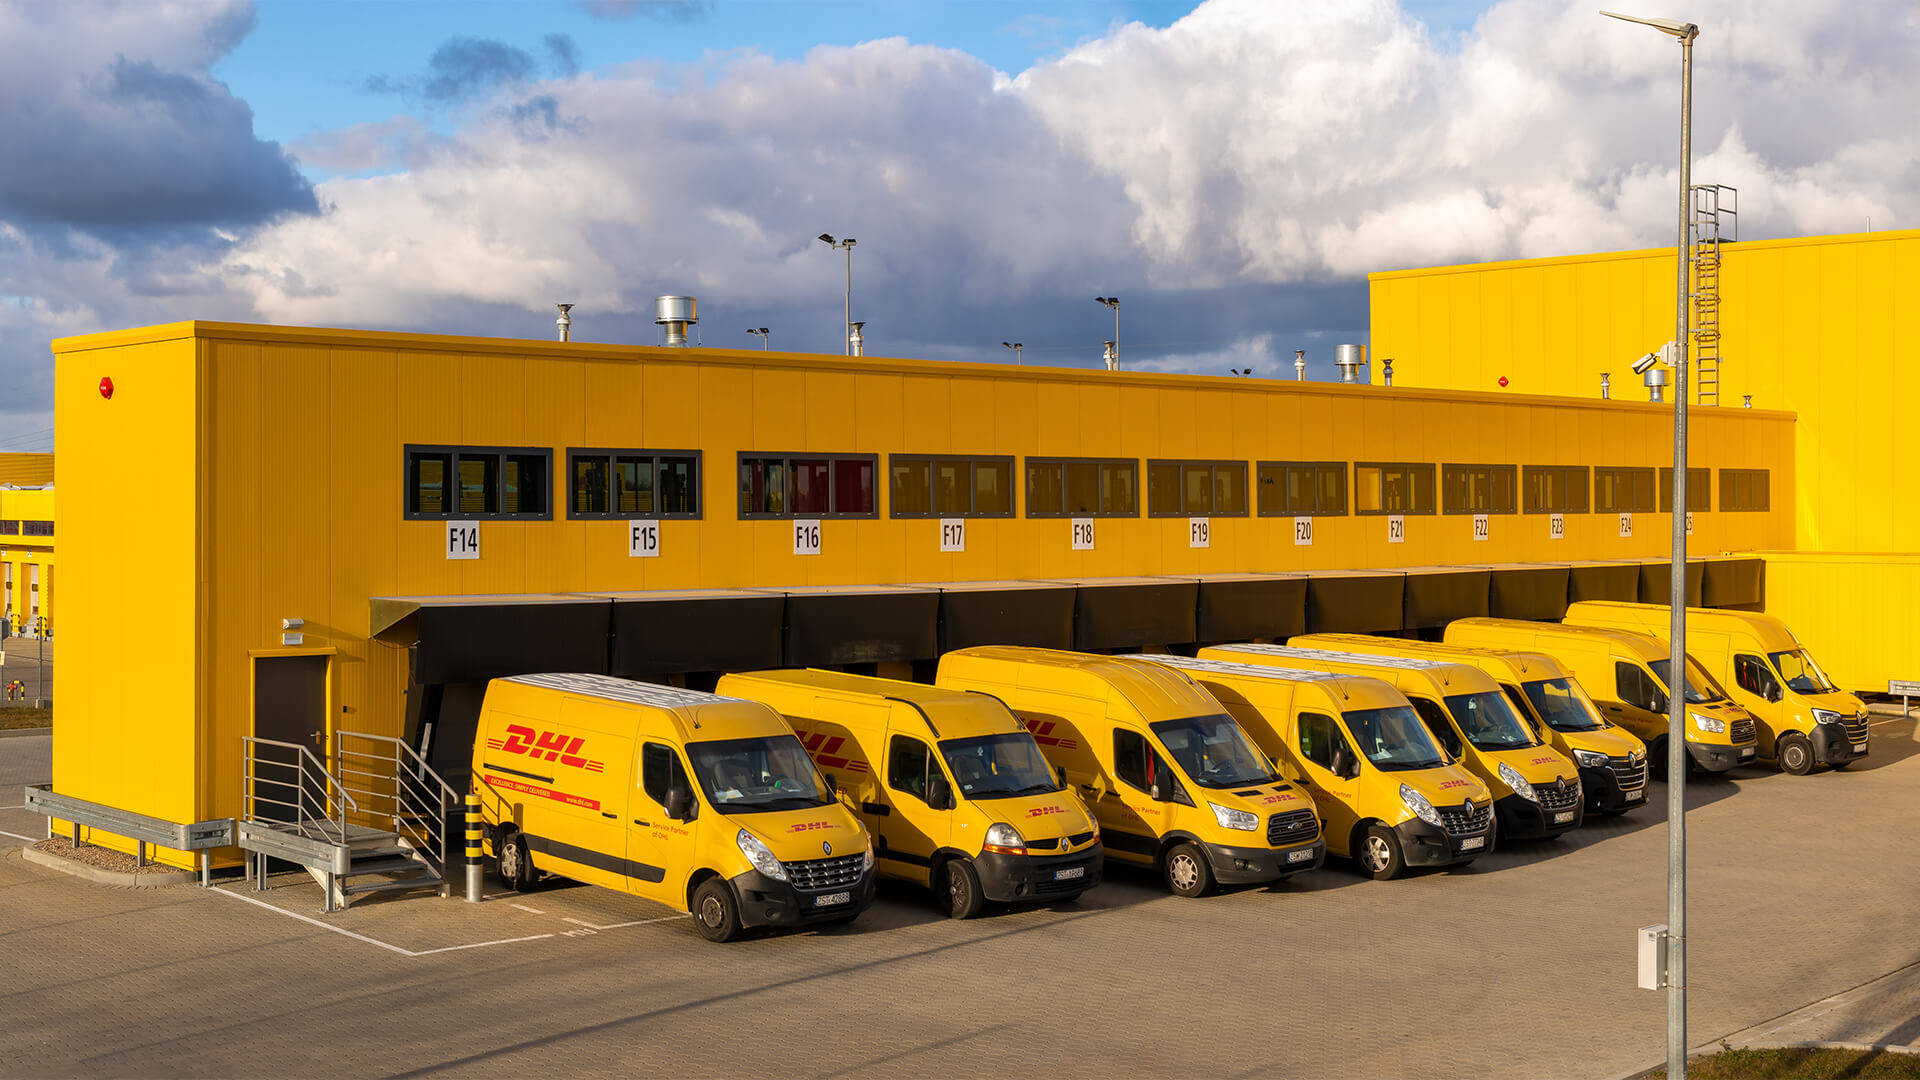 Caption: A DHL Delivery Van in a Parking Area Wallpaper